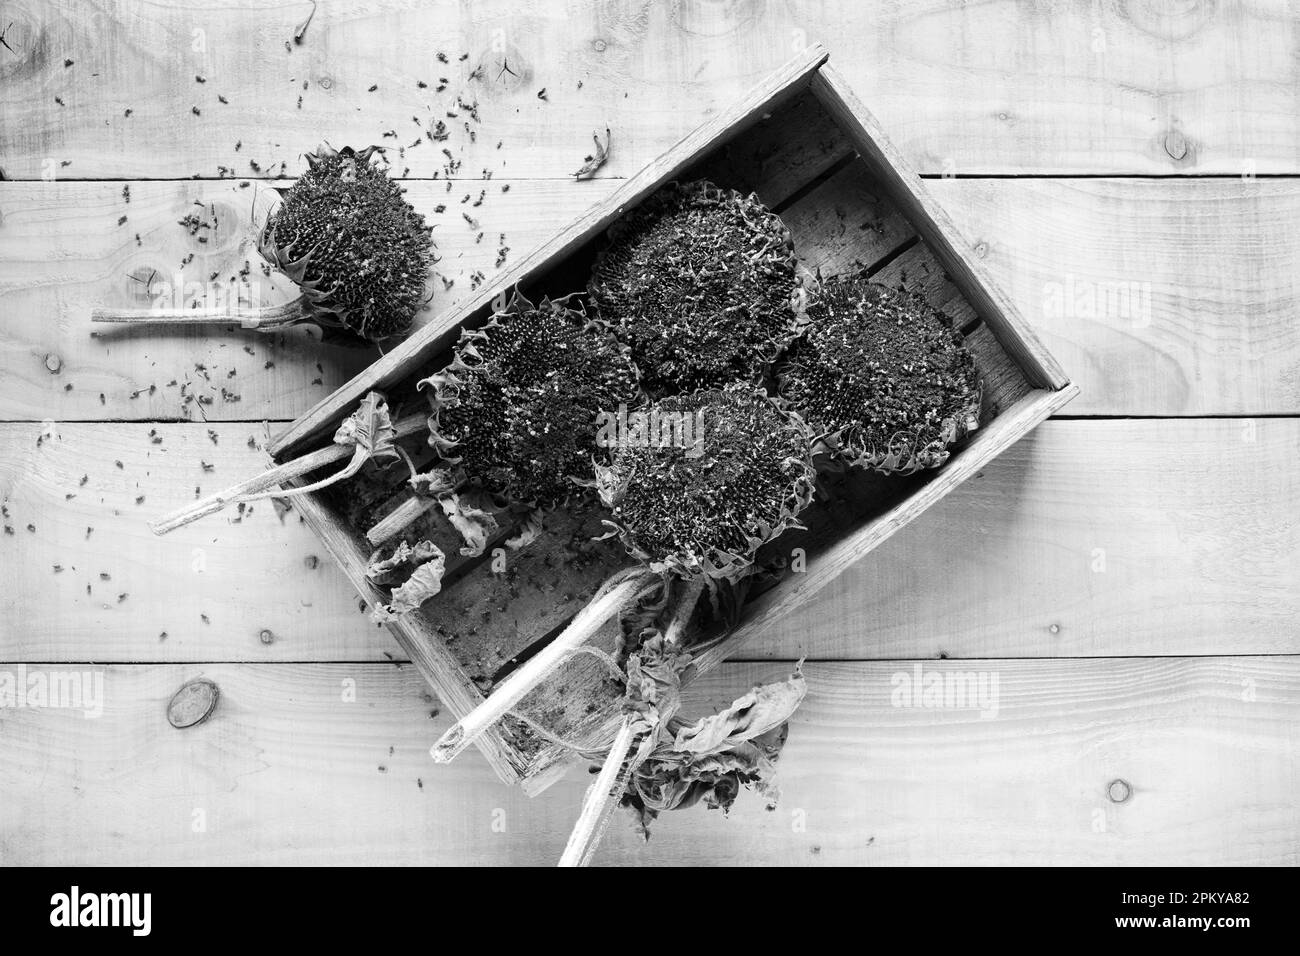 Helianthus annuus. Dried Sunflower seed heads in a wooden box, black and white. Stock Photo